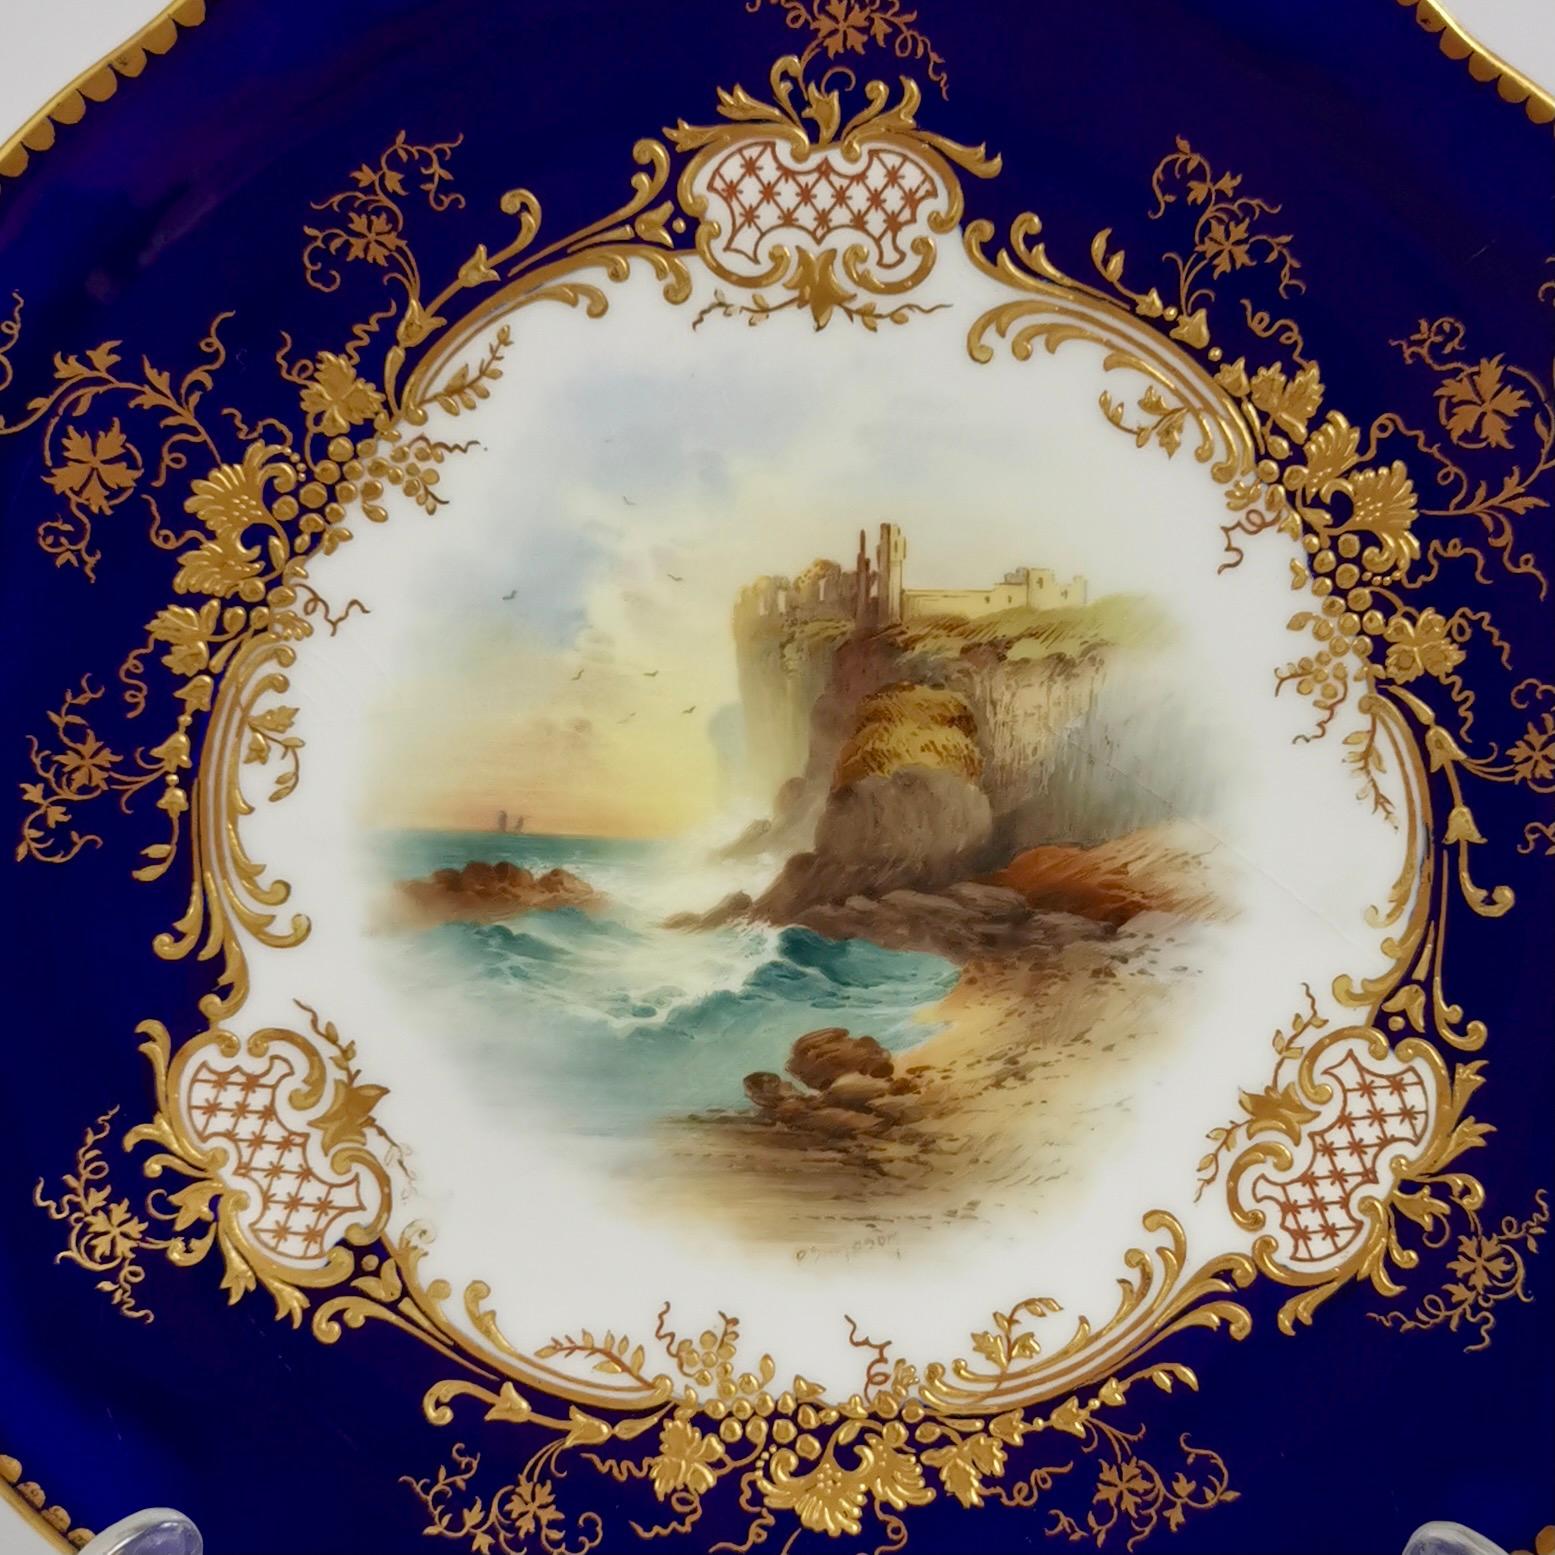 Edwardian Plate by Coalport for Thomas Goode, Tantallon Castle by P. Simpson, 1915